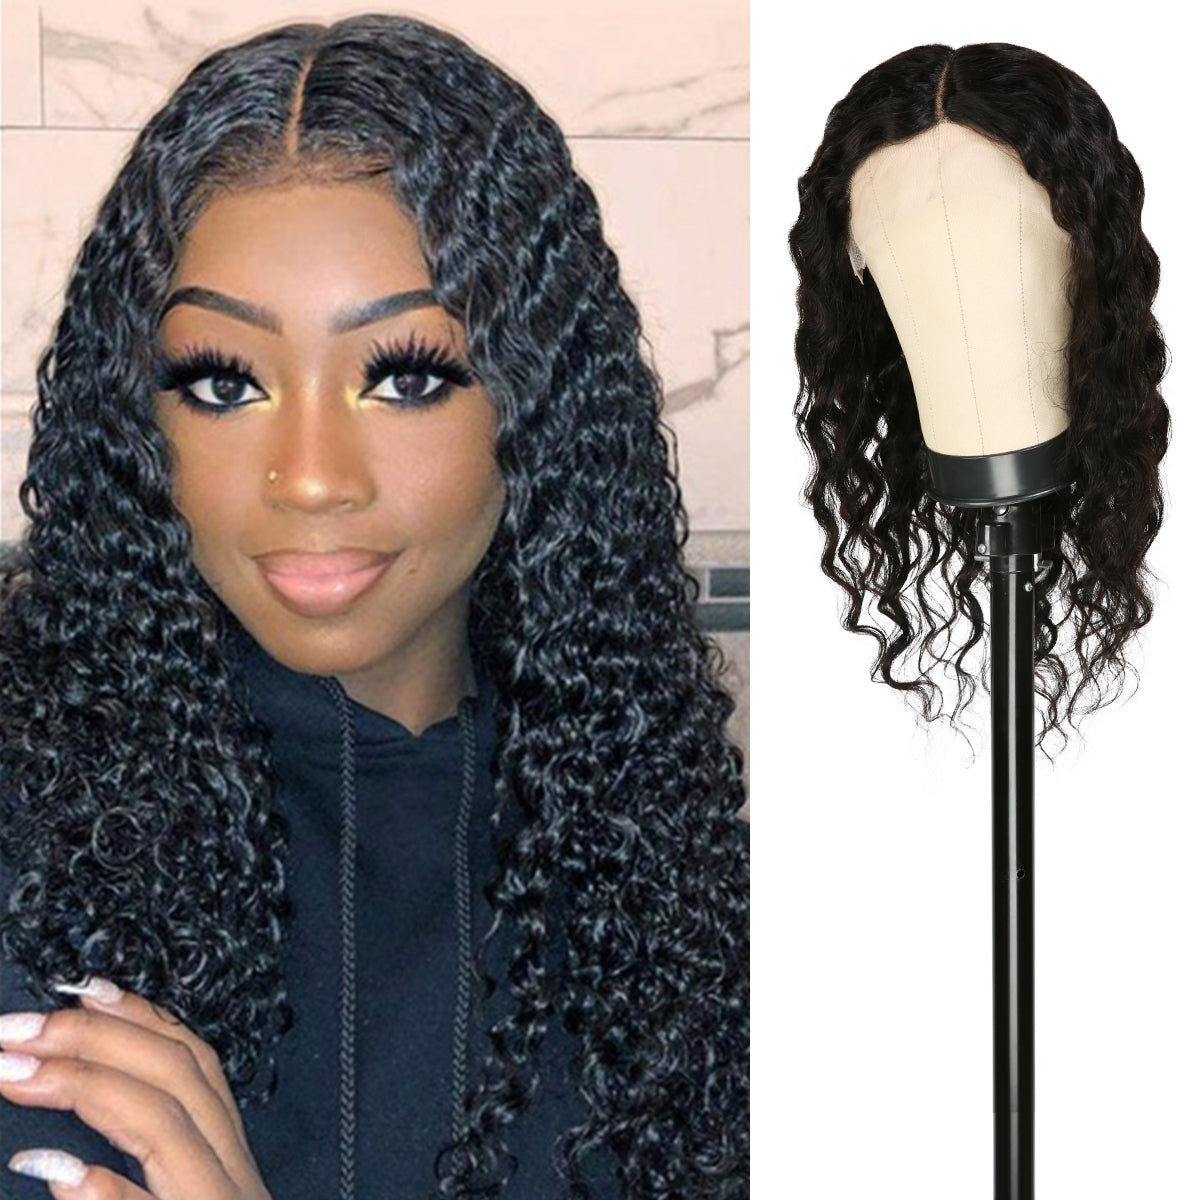 T part wig has a full front hairline area. So, this leads to a similar natural result that you would get with a more expensive lace frontal wig. 150% Density Transparent Lace Wig made with Virgin Human hair,  Pre-plucked to perfection, Best summer vacation wigs, Natural color wig, Pre-Plucked with Baby Hair, Low maintenance hairstyle. Fits All Face Shapes.